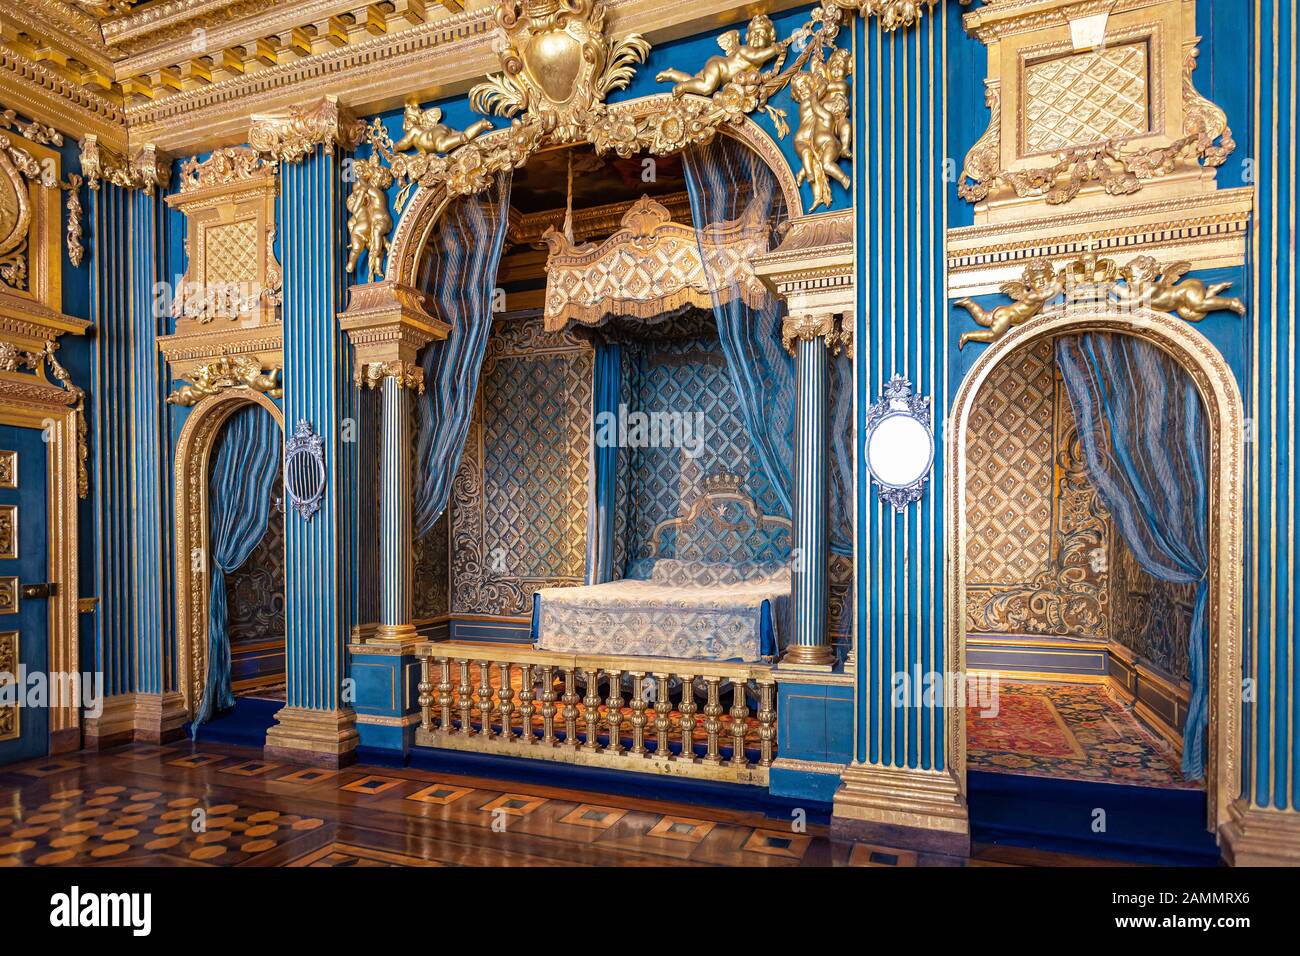 STOCKHOLM,SWEDEN-JULY14,2019: Interior view of Drottningholm palace at Stockholm, Sweden, it is one of Sweden's Royal Palaces Stock Photo